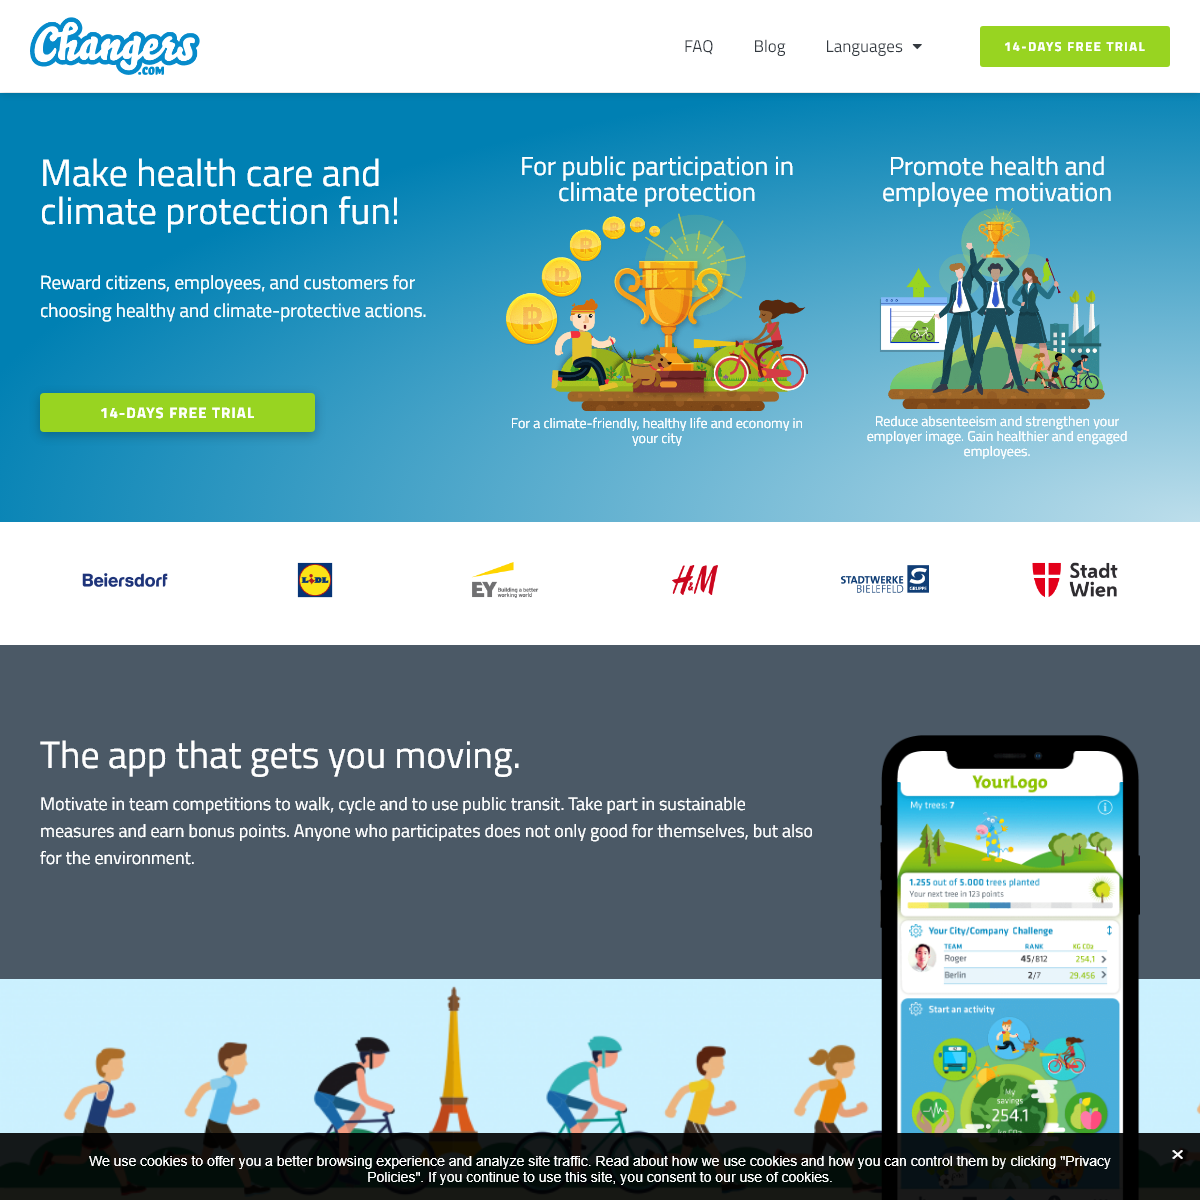 Changers.com - Your bonus for health care and climate protection